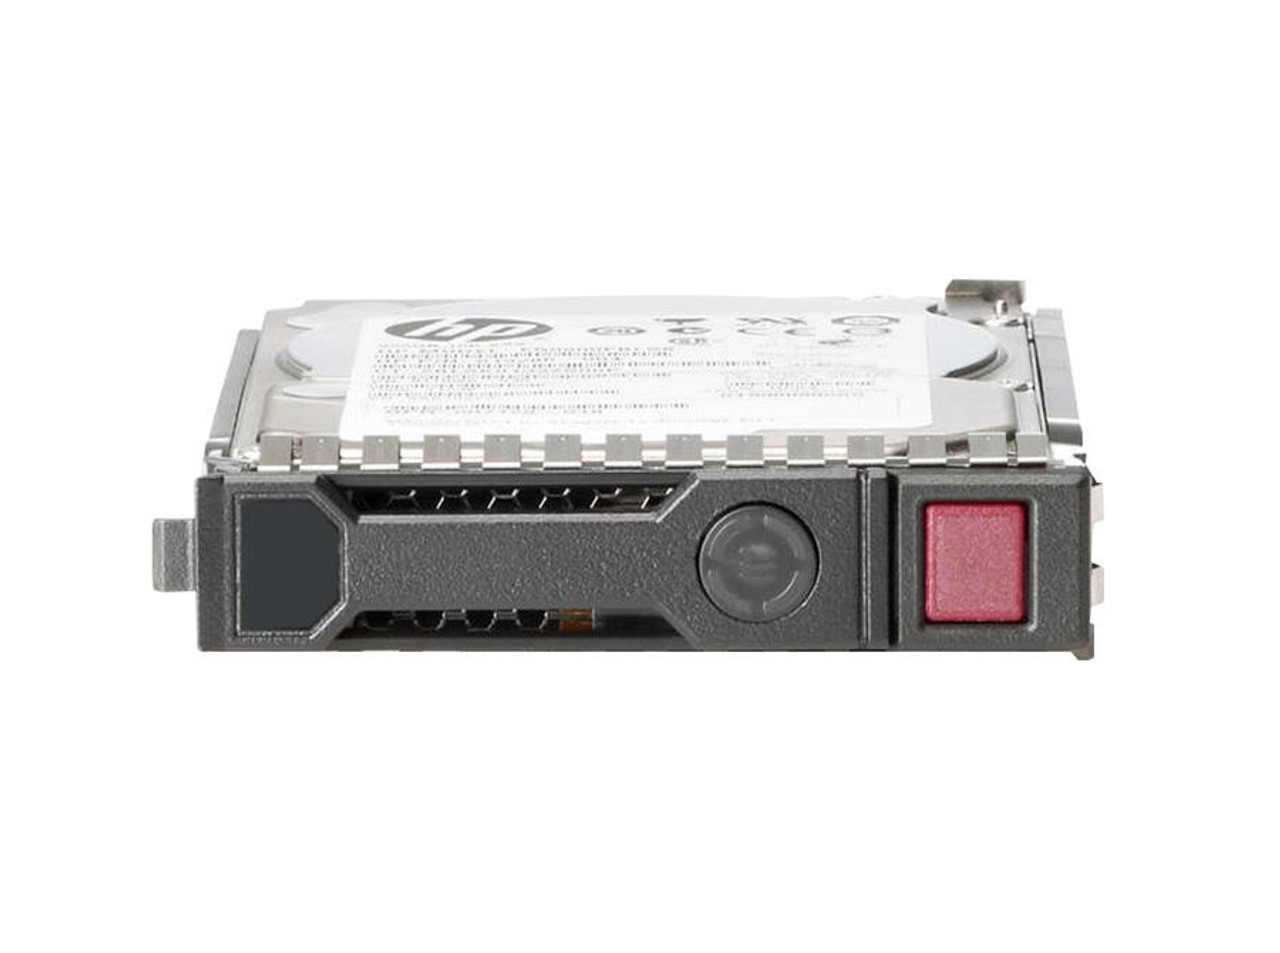 J9F42A#0D1 HP 600GB 15000RPM SAS 12Gbps Hot Swap 2.5-inch Internal Hard Drive with 3.5-inch Smart Carrier